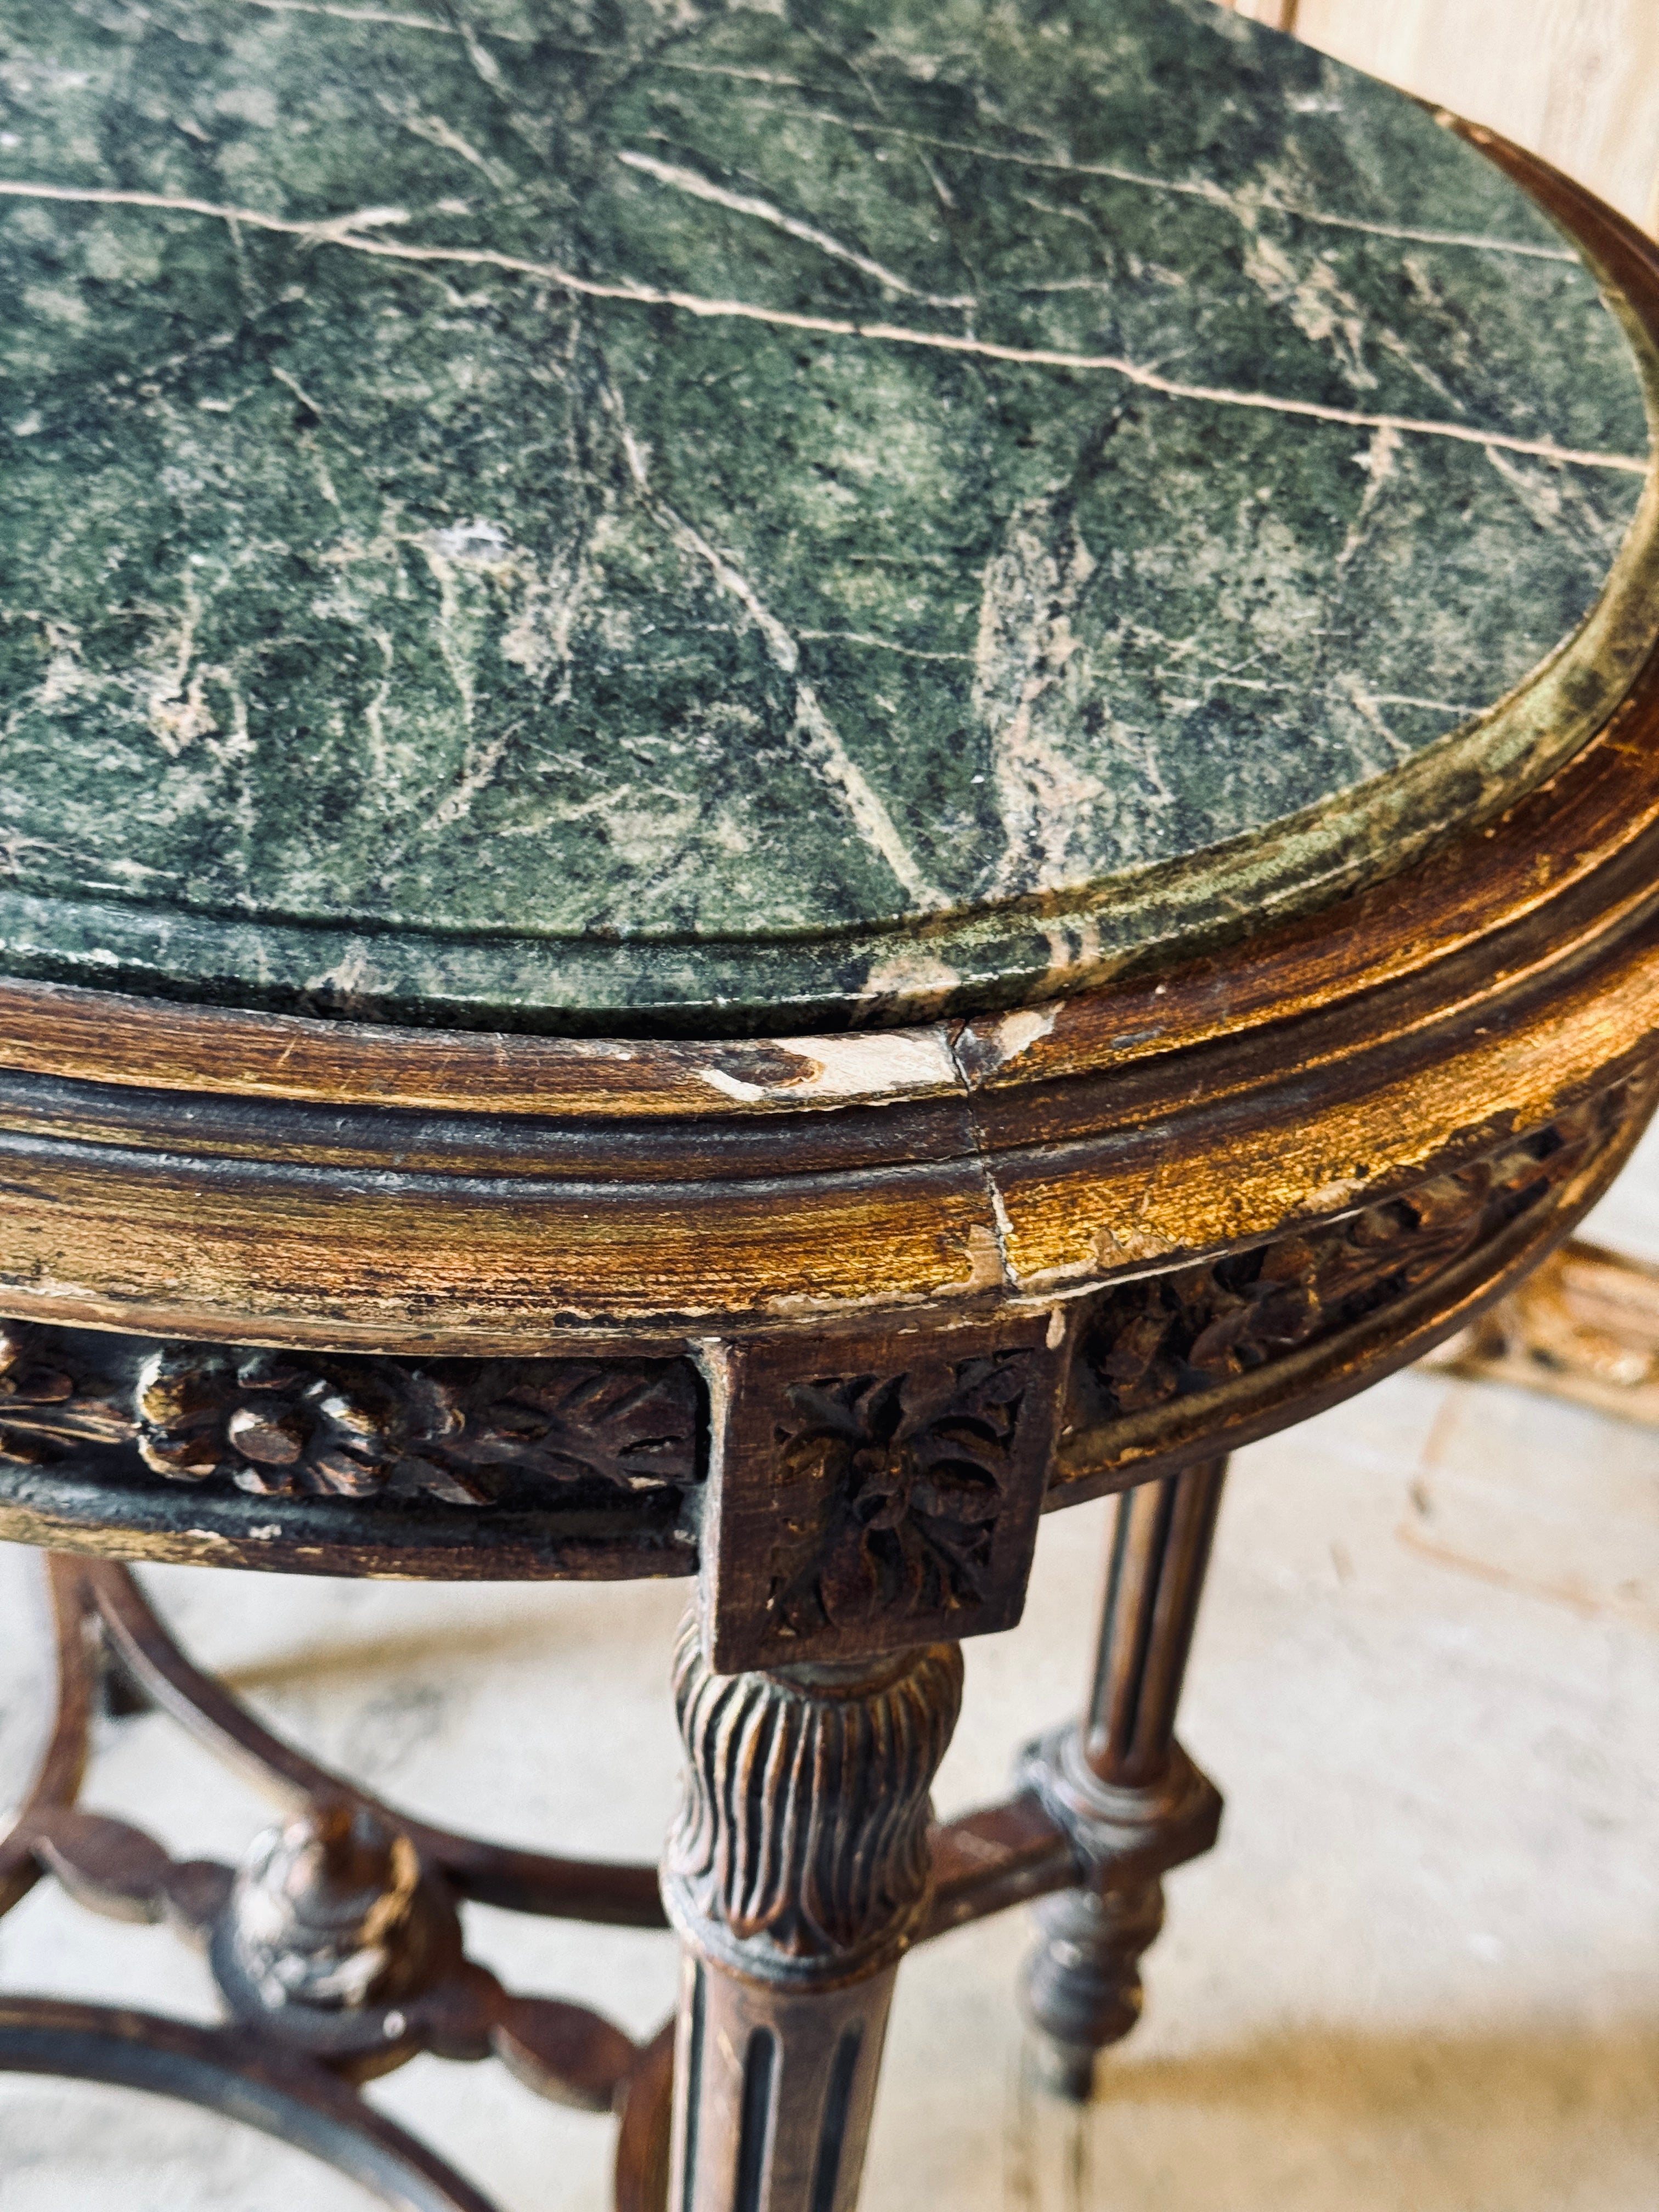 19th Century French Green Marble Top Side Table